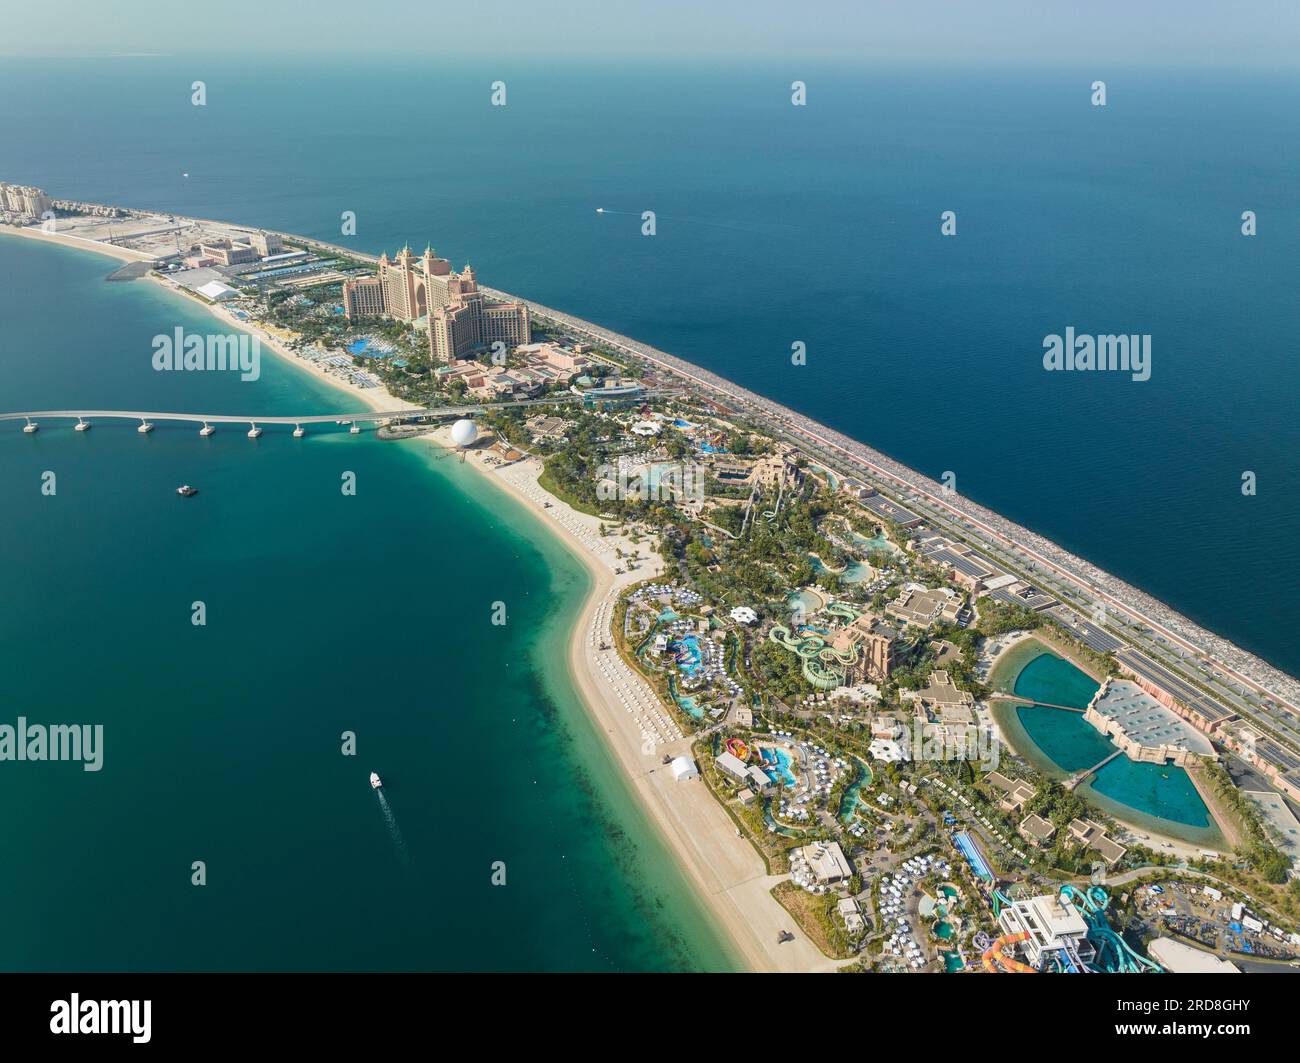 Aerial view of Palm Jumeirah, Dubai, United Arab Emirates, Middle East Stock Photo